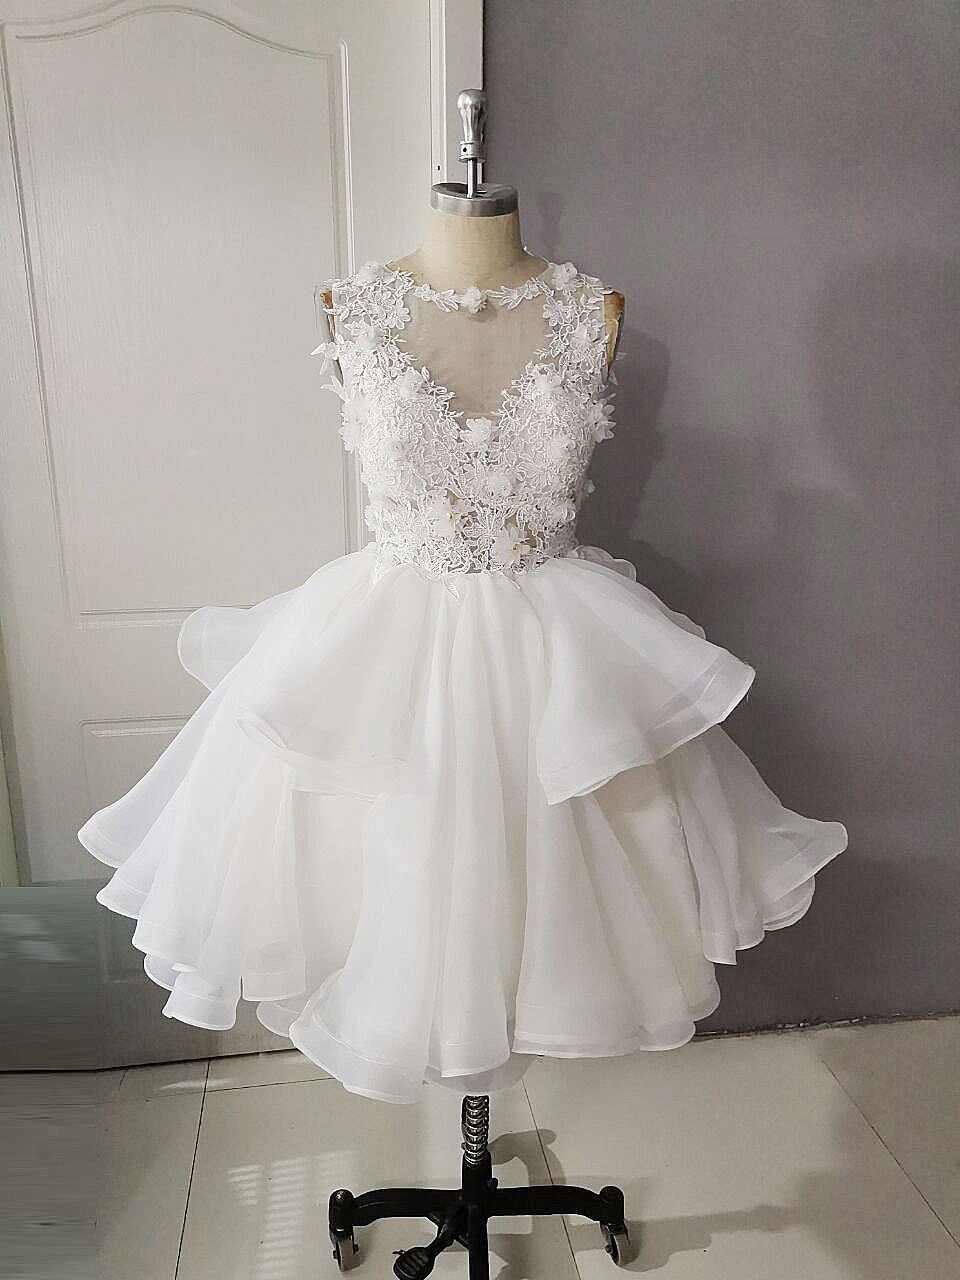 Elegant Sweetheart Round Neck Tulle Lace Homecoming Dress, Beautiful Short Dress, Banquet Party Dress